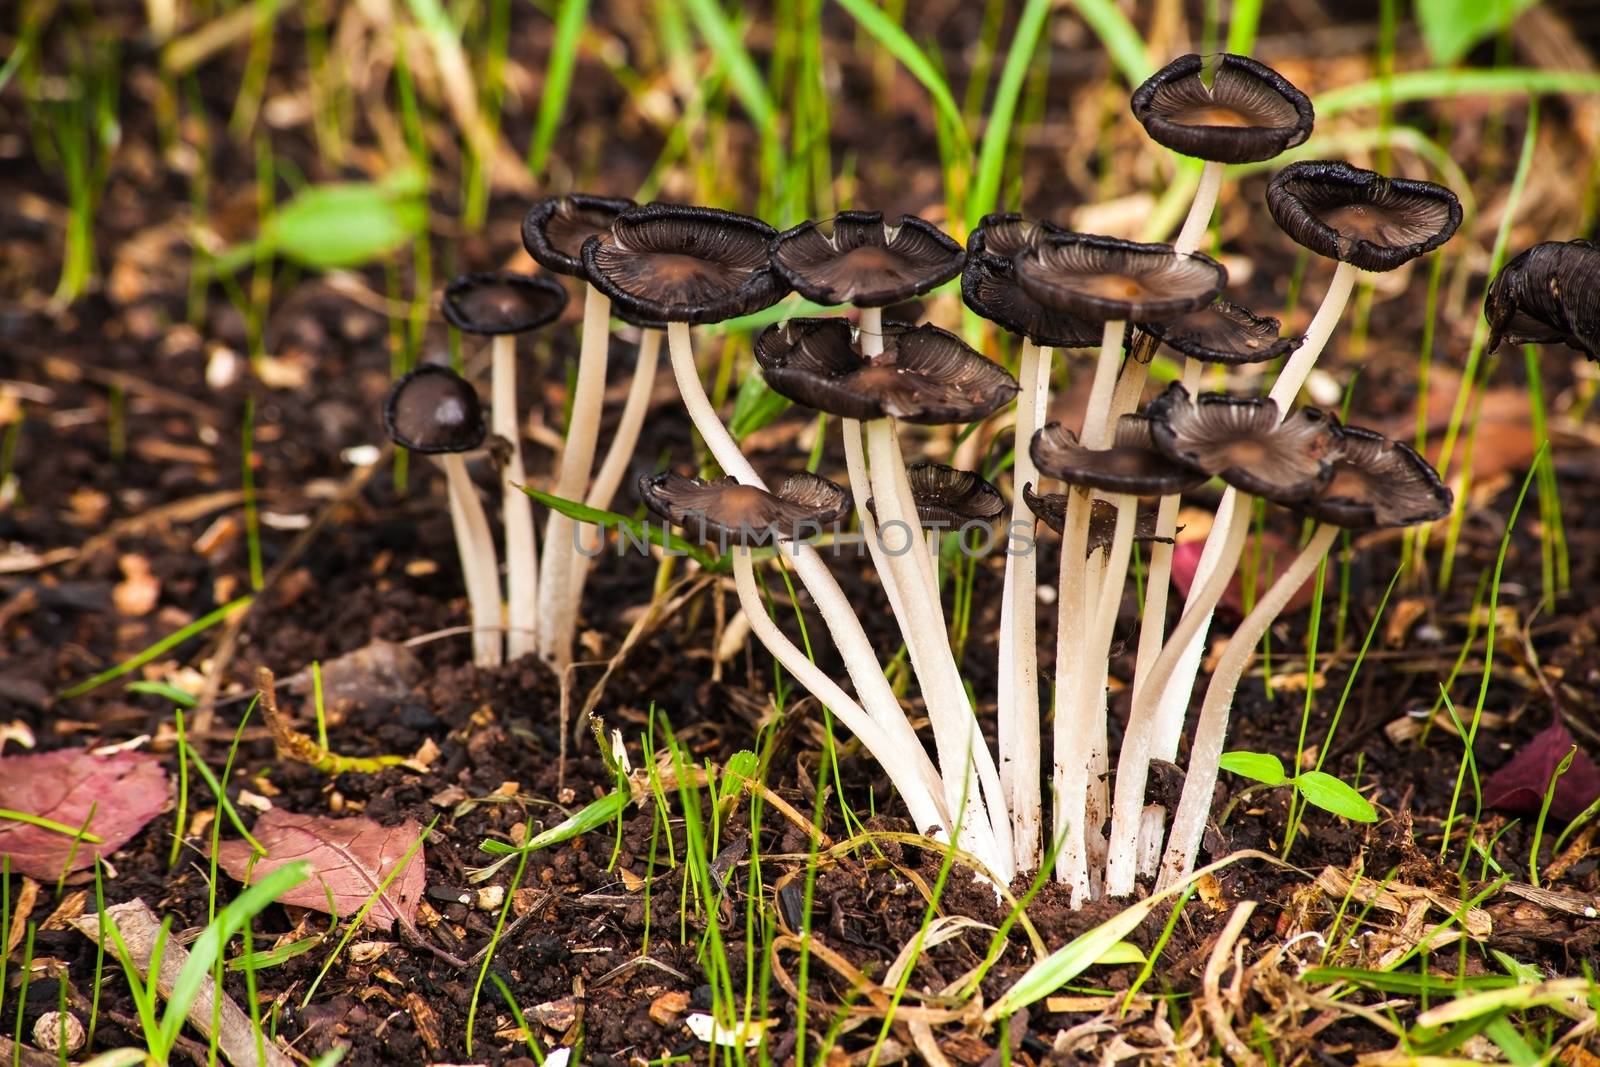 Group of small mushrooms by kobus_peche